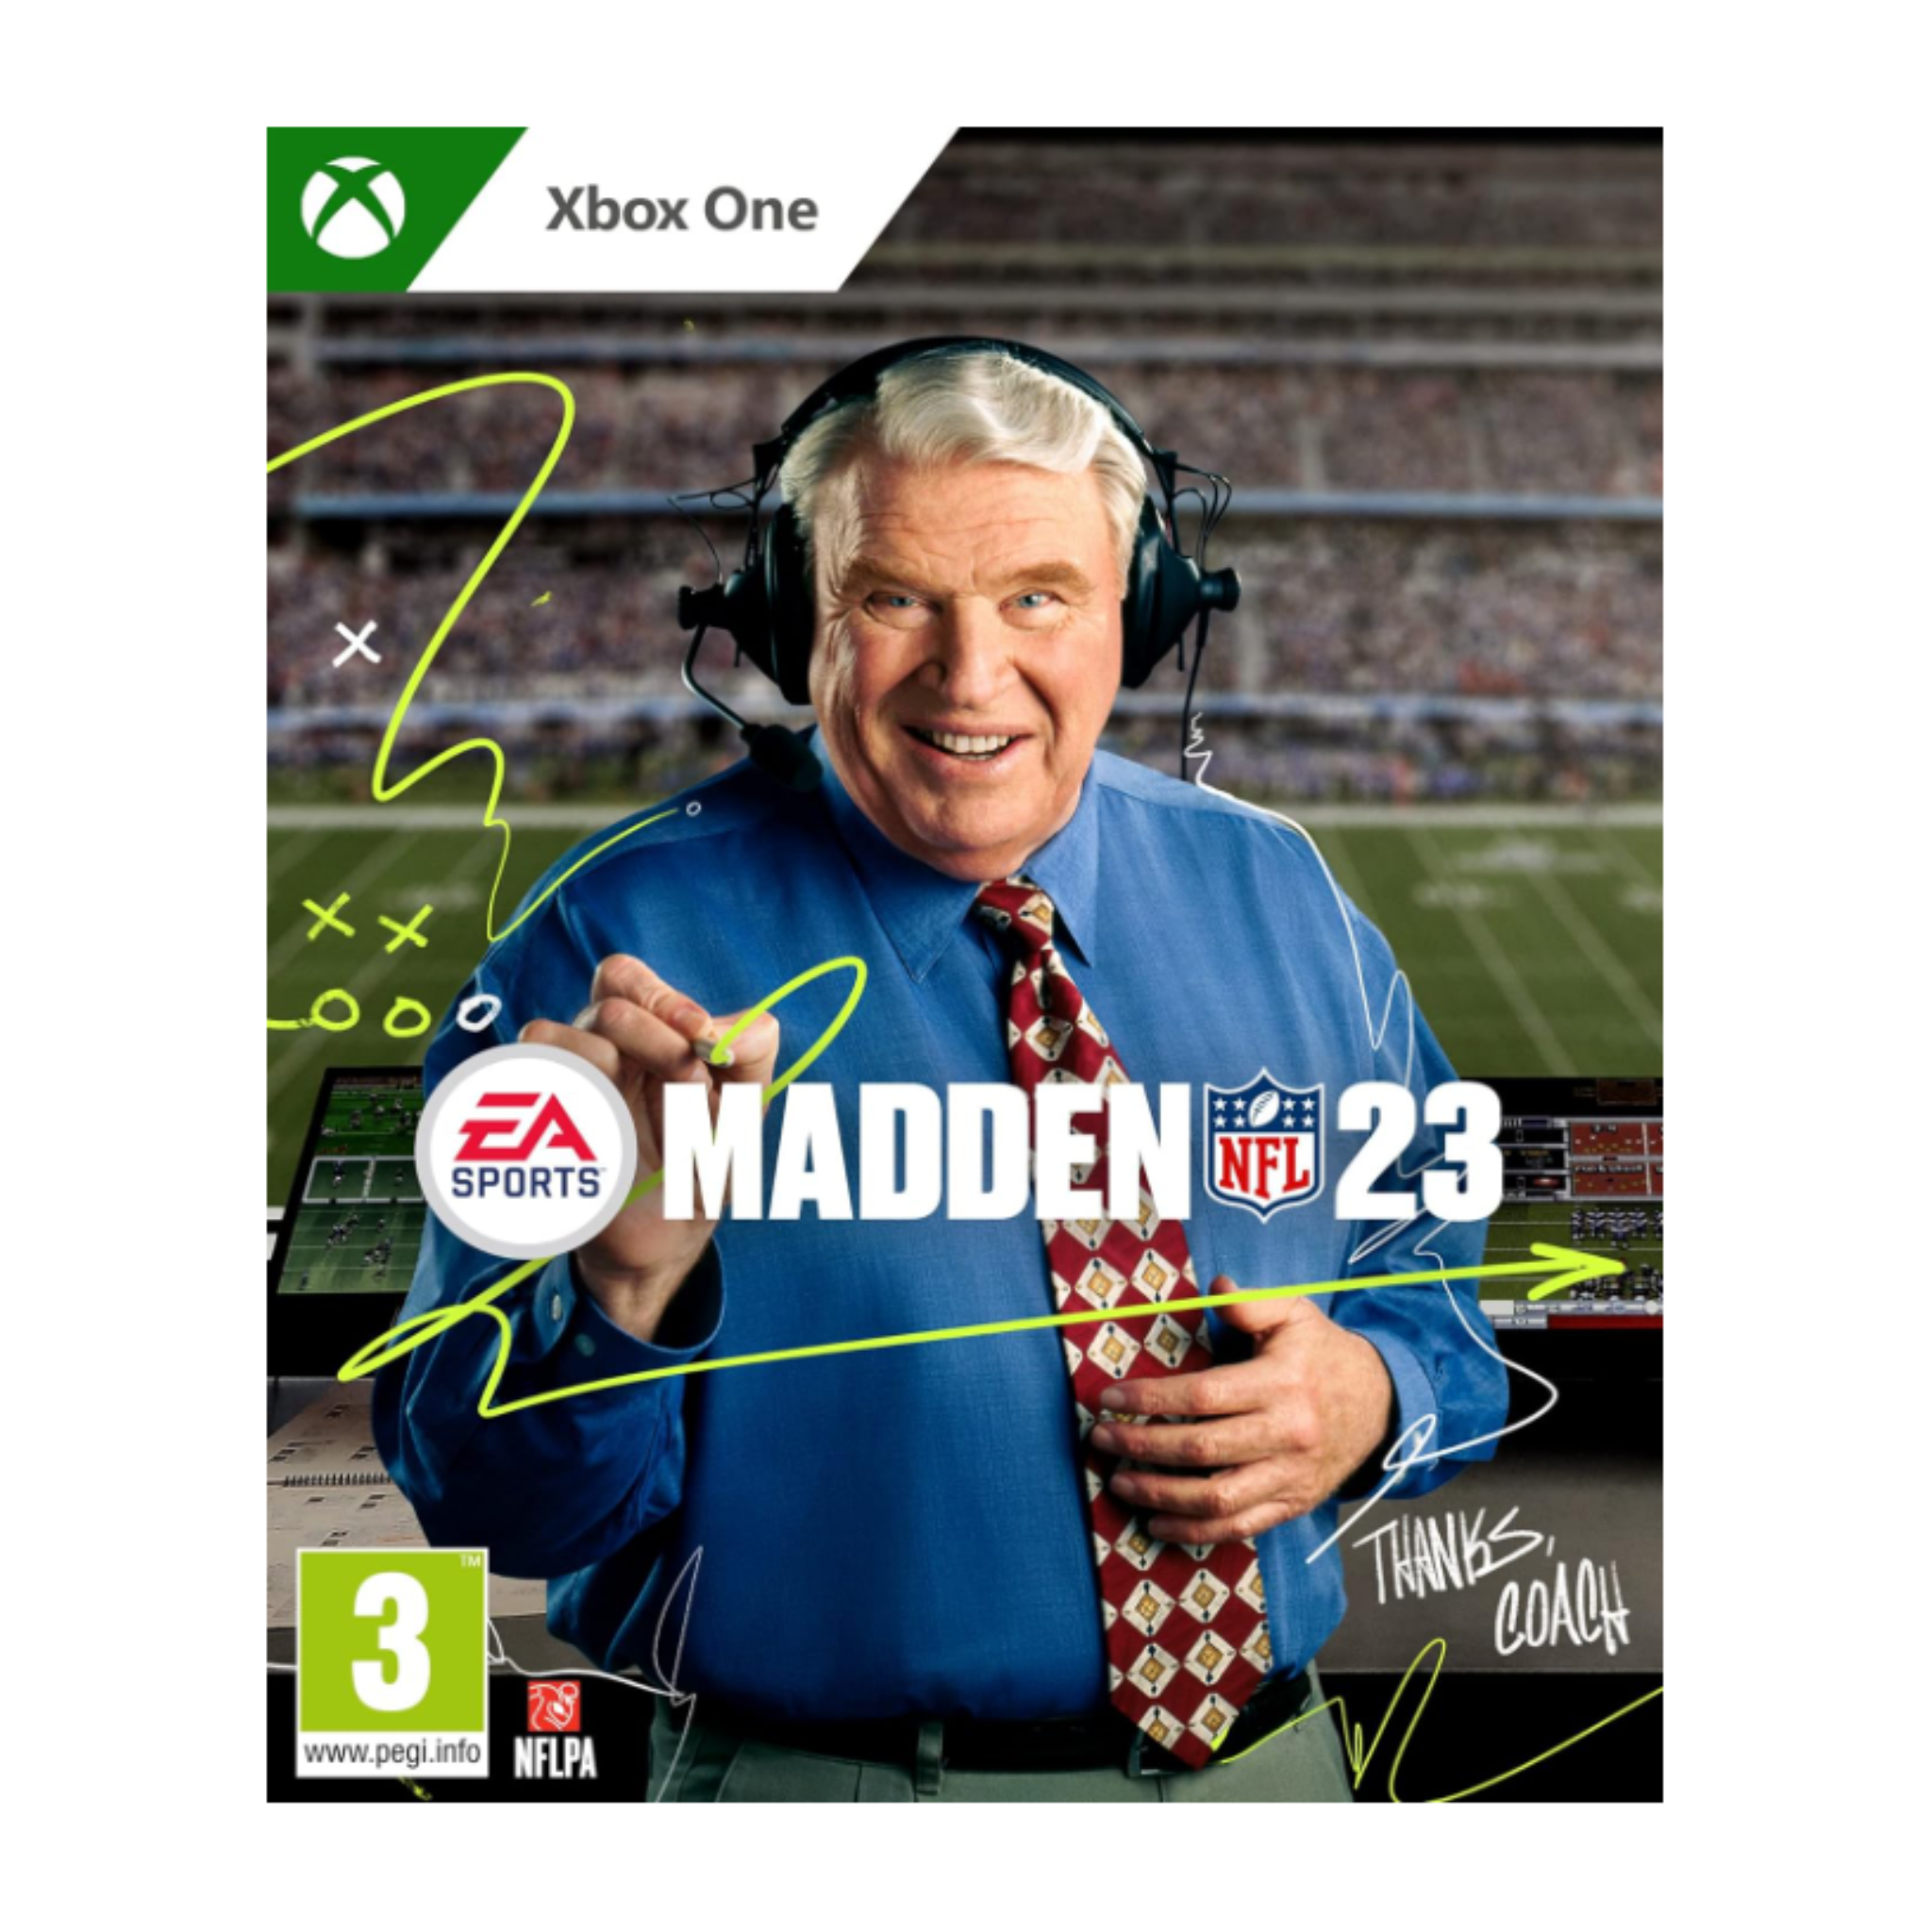 Image of Madden NFL 23 video Game for Xbox One